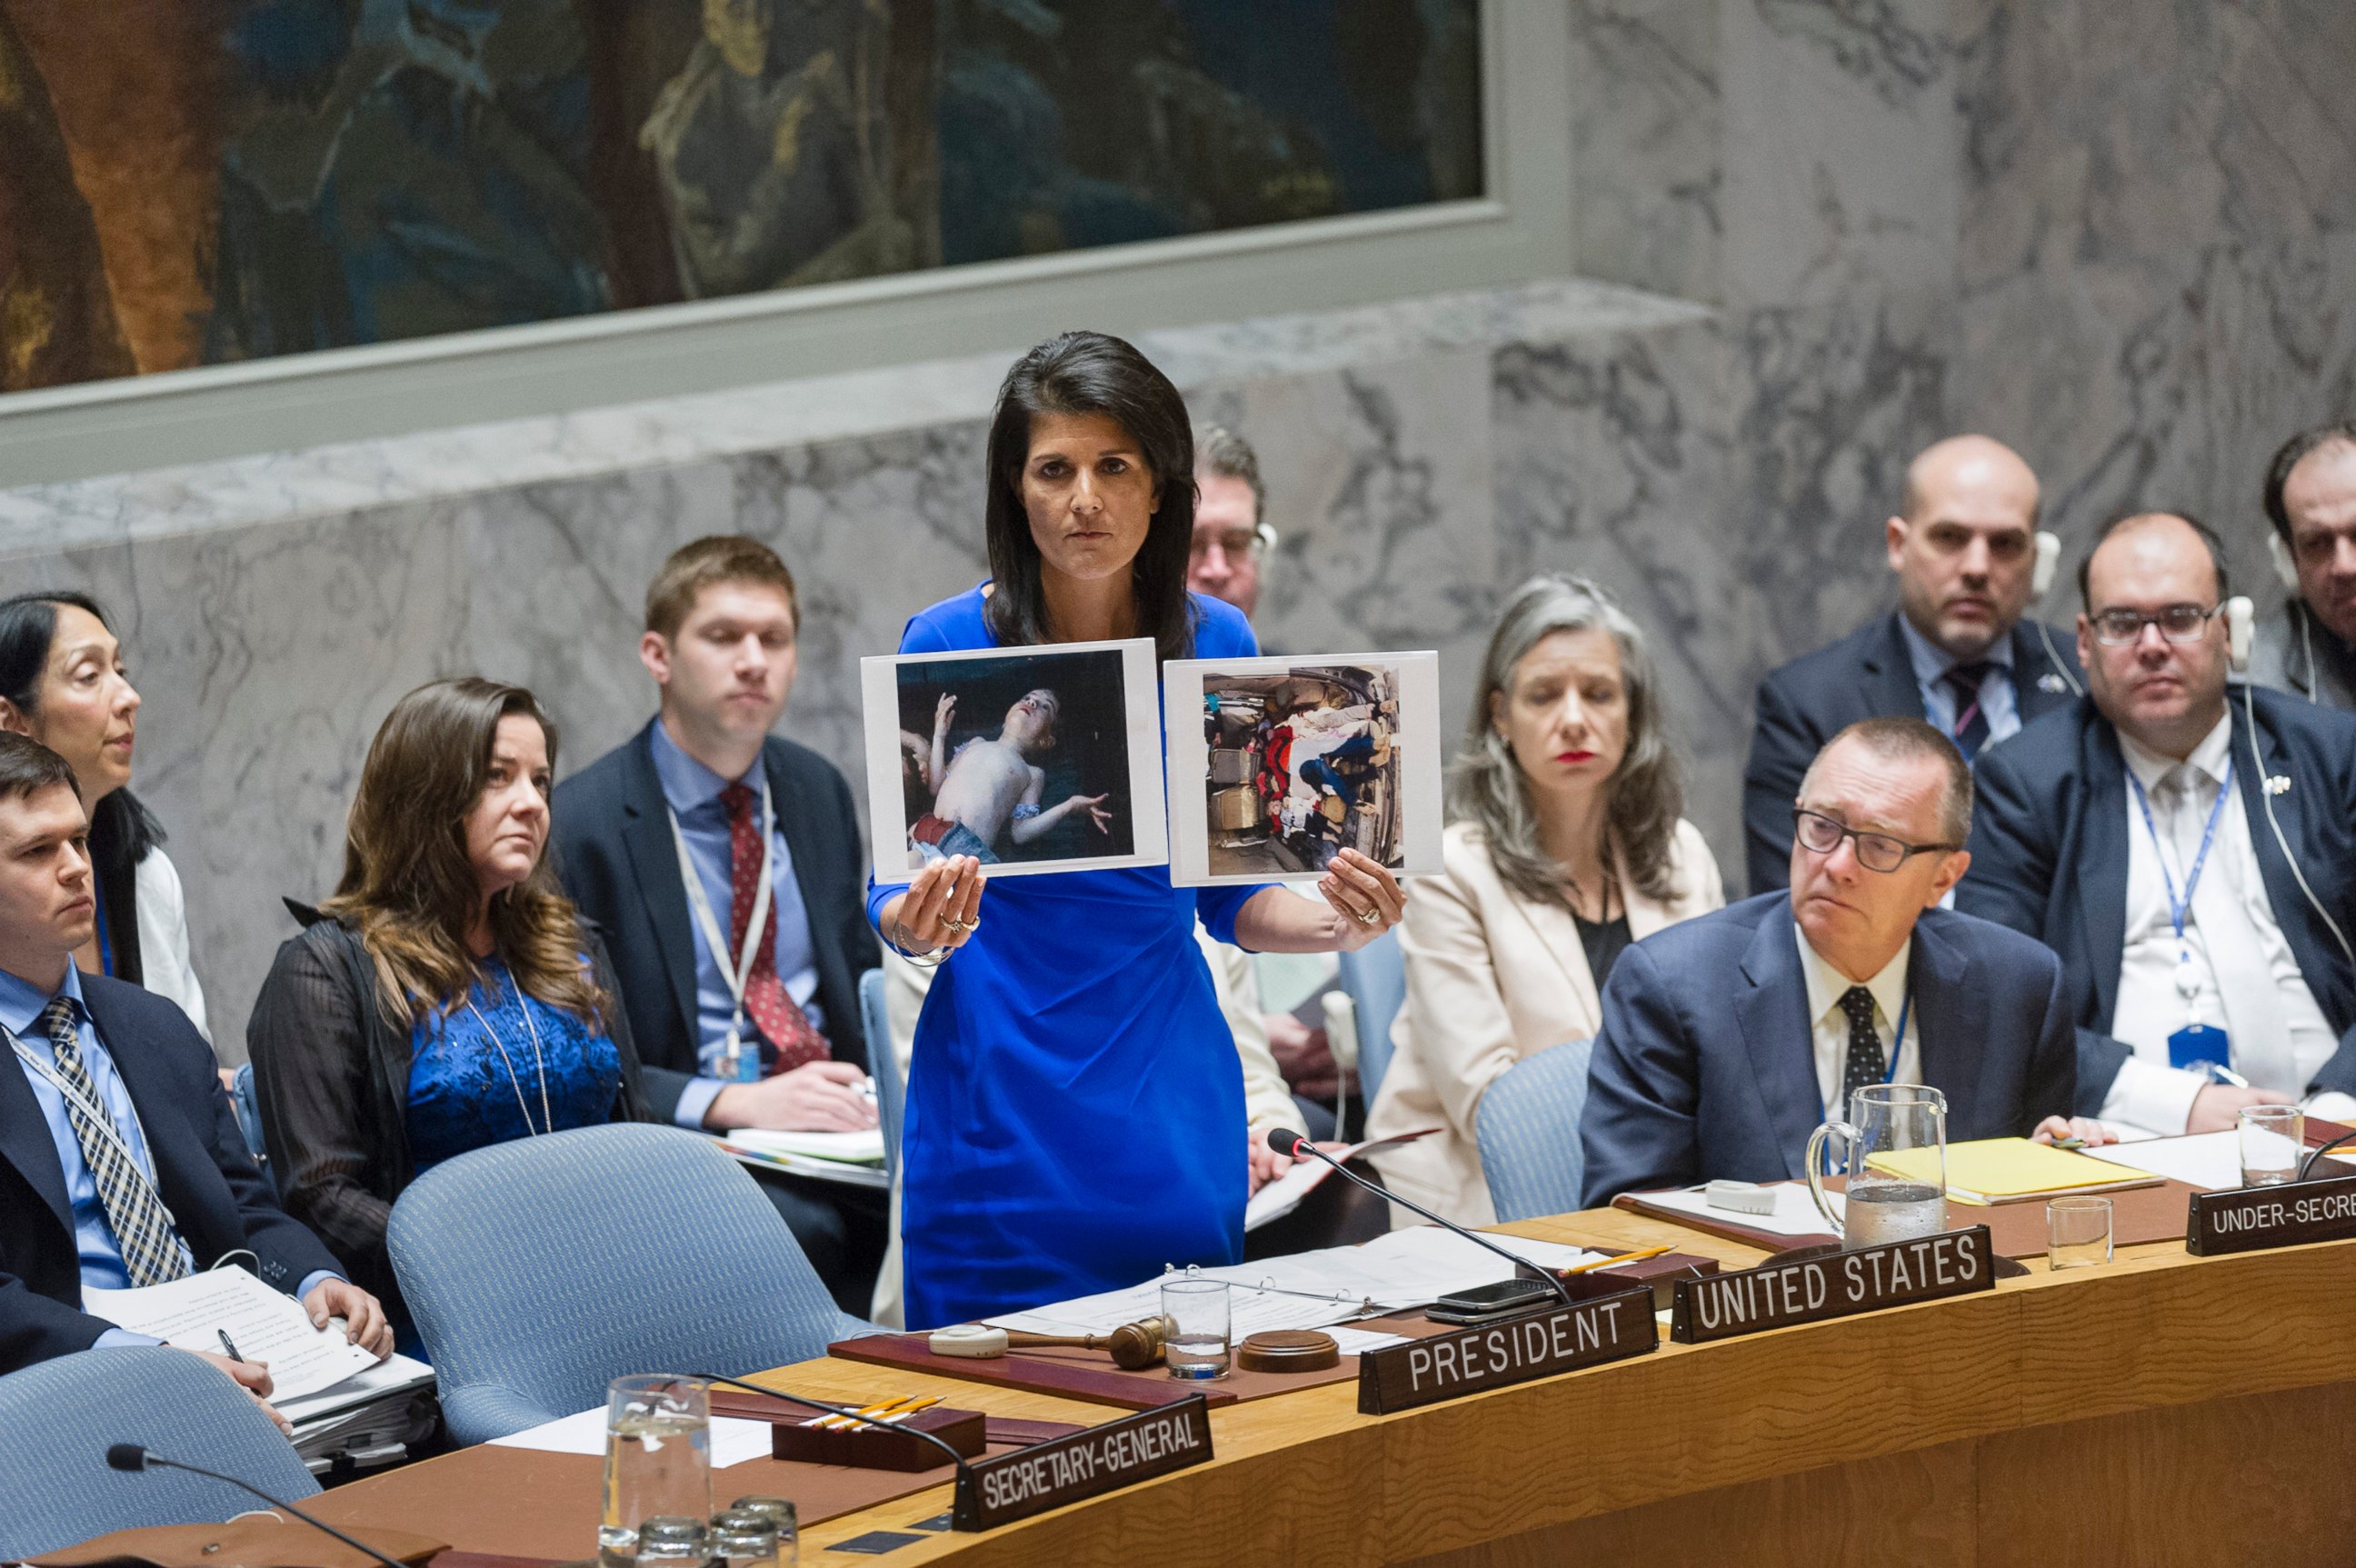 PHOTO: Nikki Haley, United States Permanent Representative to the UN, addresses the UN Security Council on April 5, 2017 in New York, while holding two photographs of Syrian children killed an alleged chemical attack. 